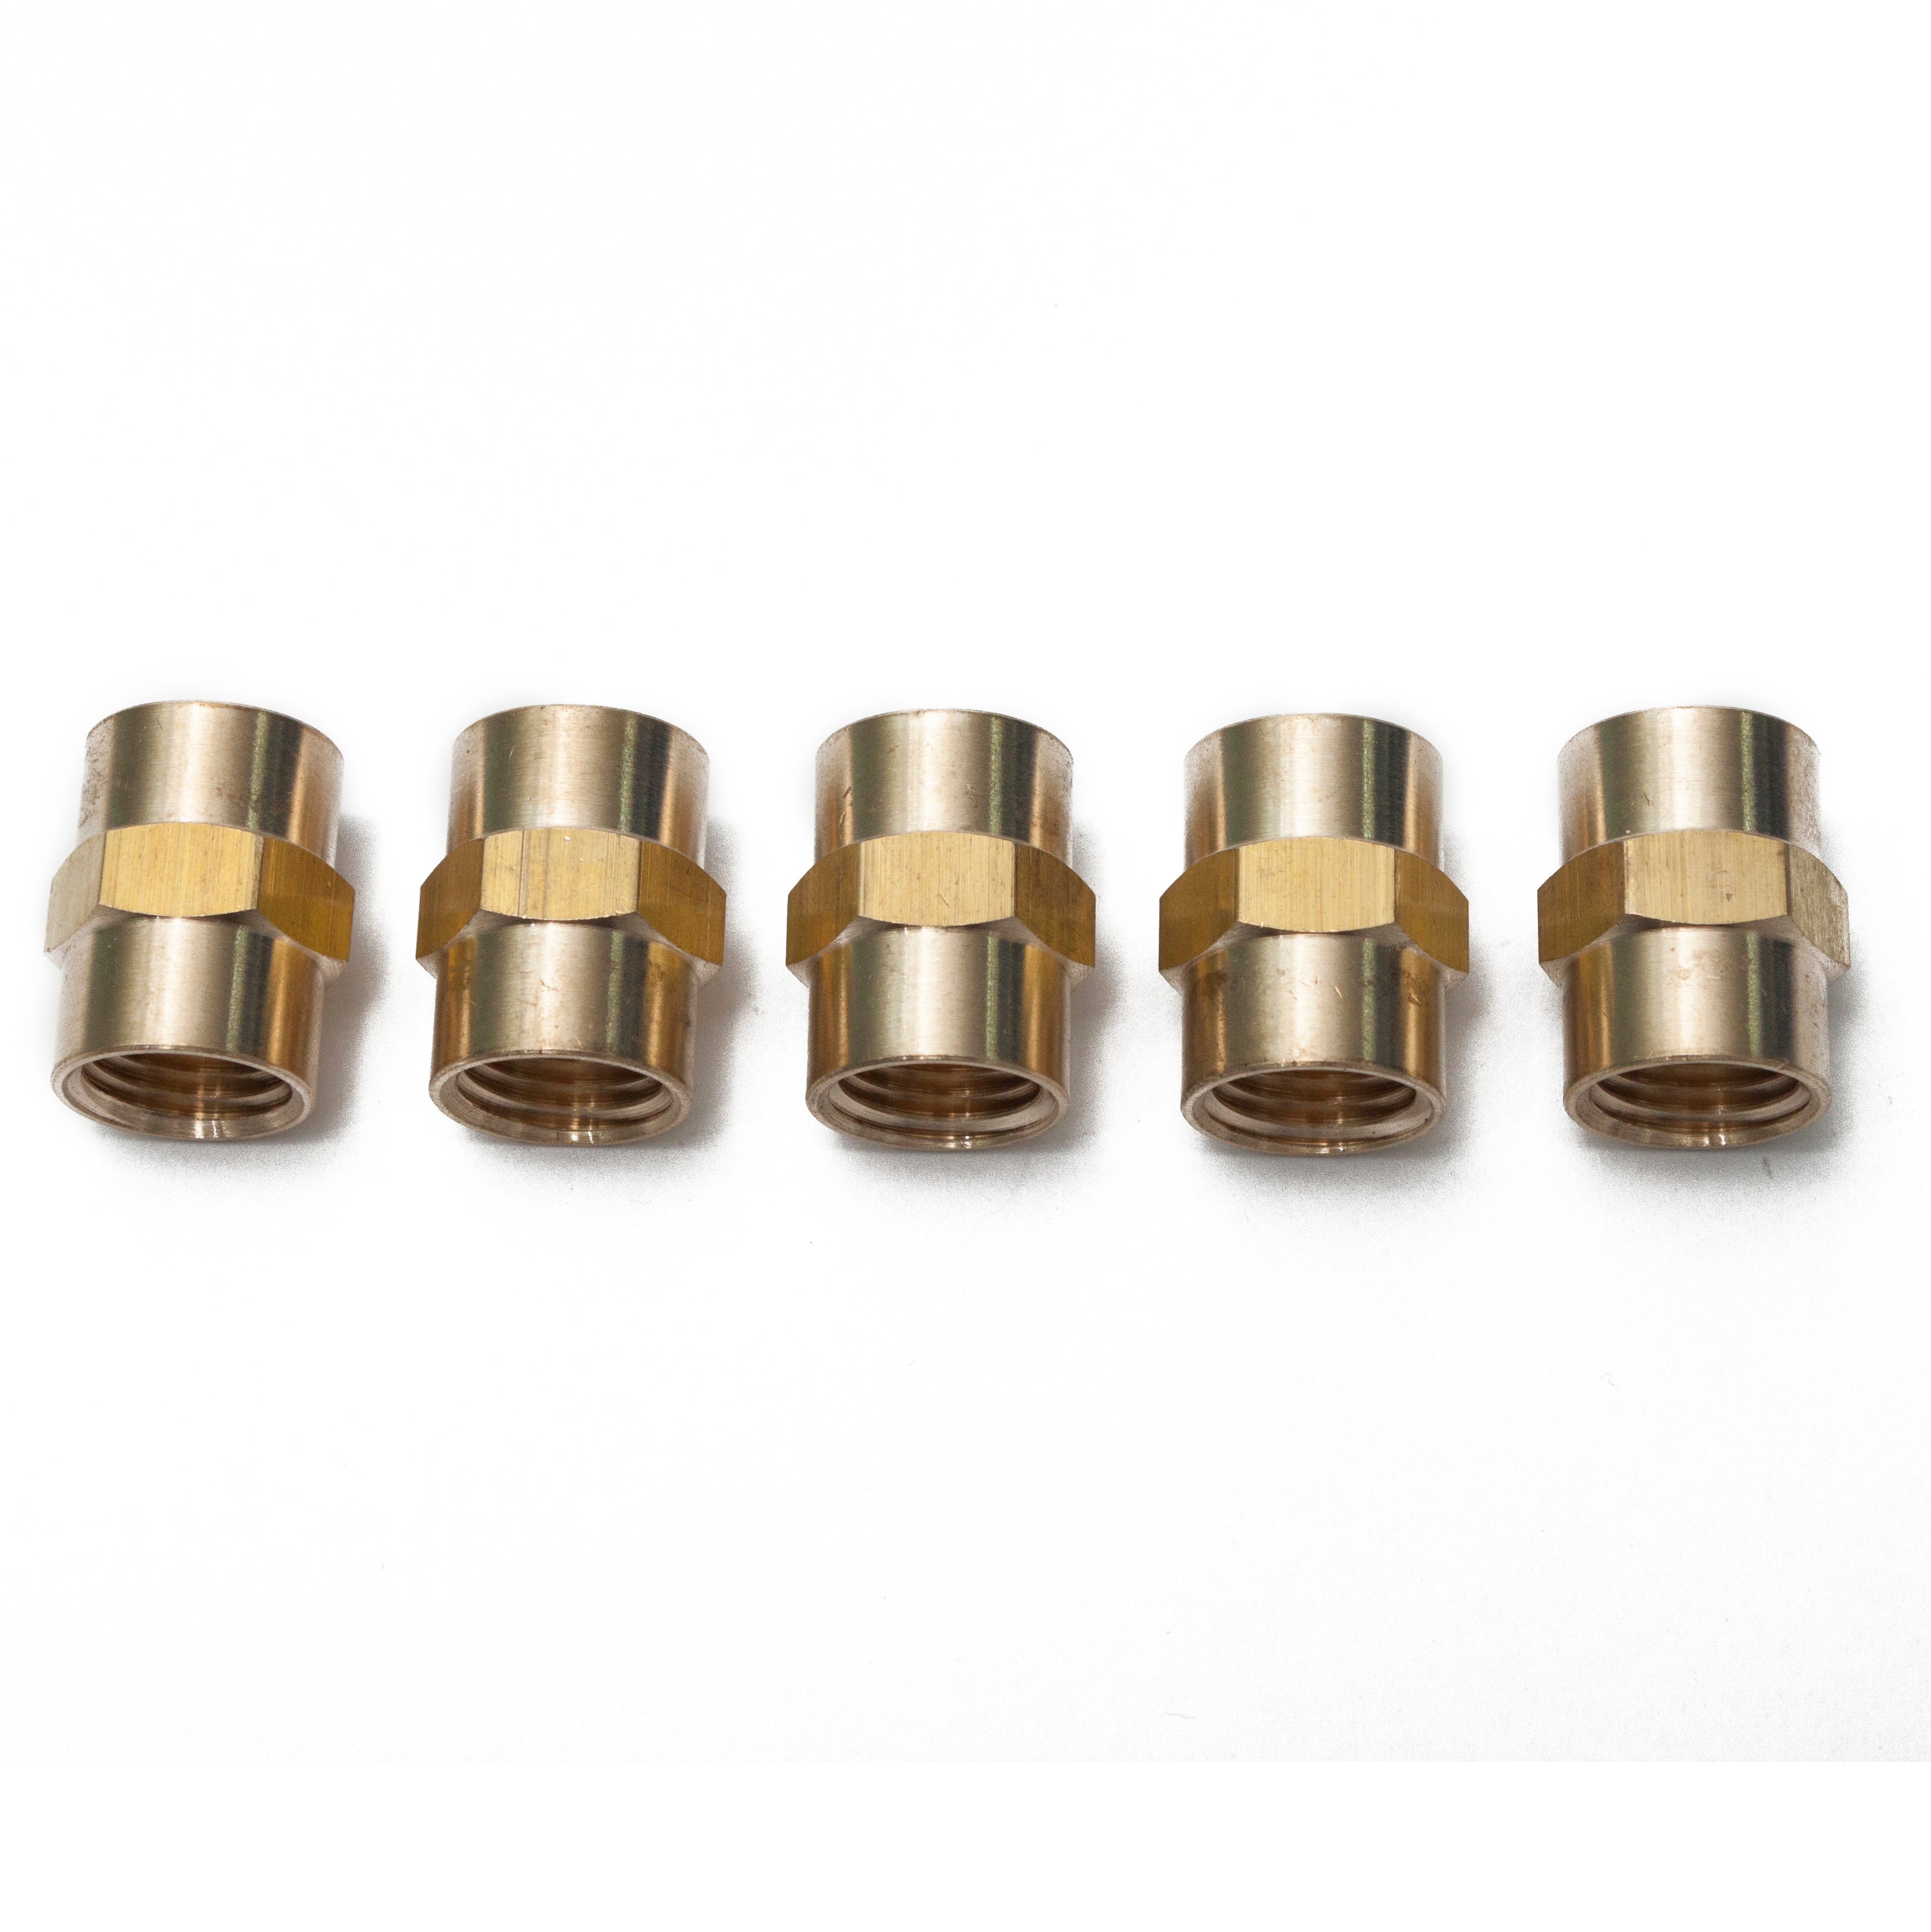 LTWFITTING Brass Pipe Fitting 1/4-Inch Female BSPT Coupling Water Boat (Pack of 5)